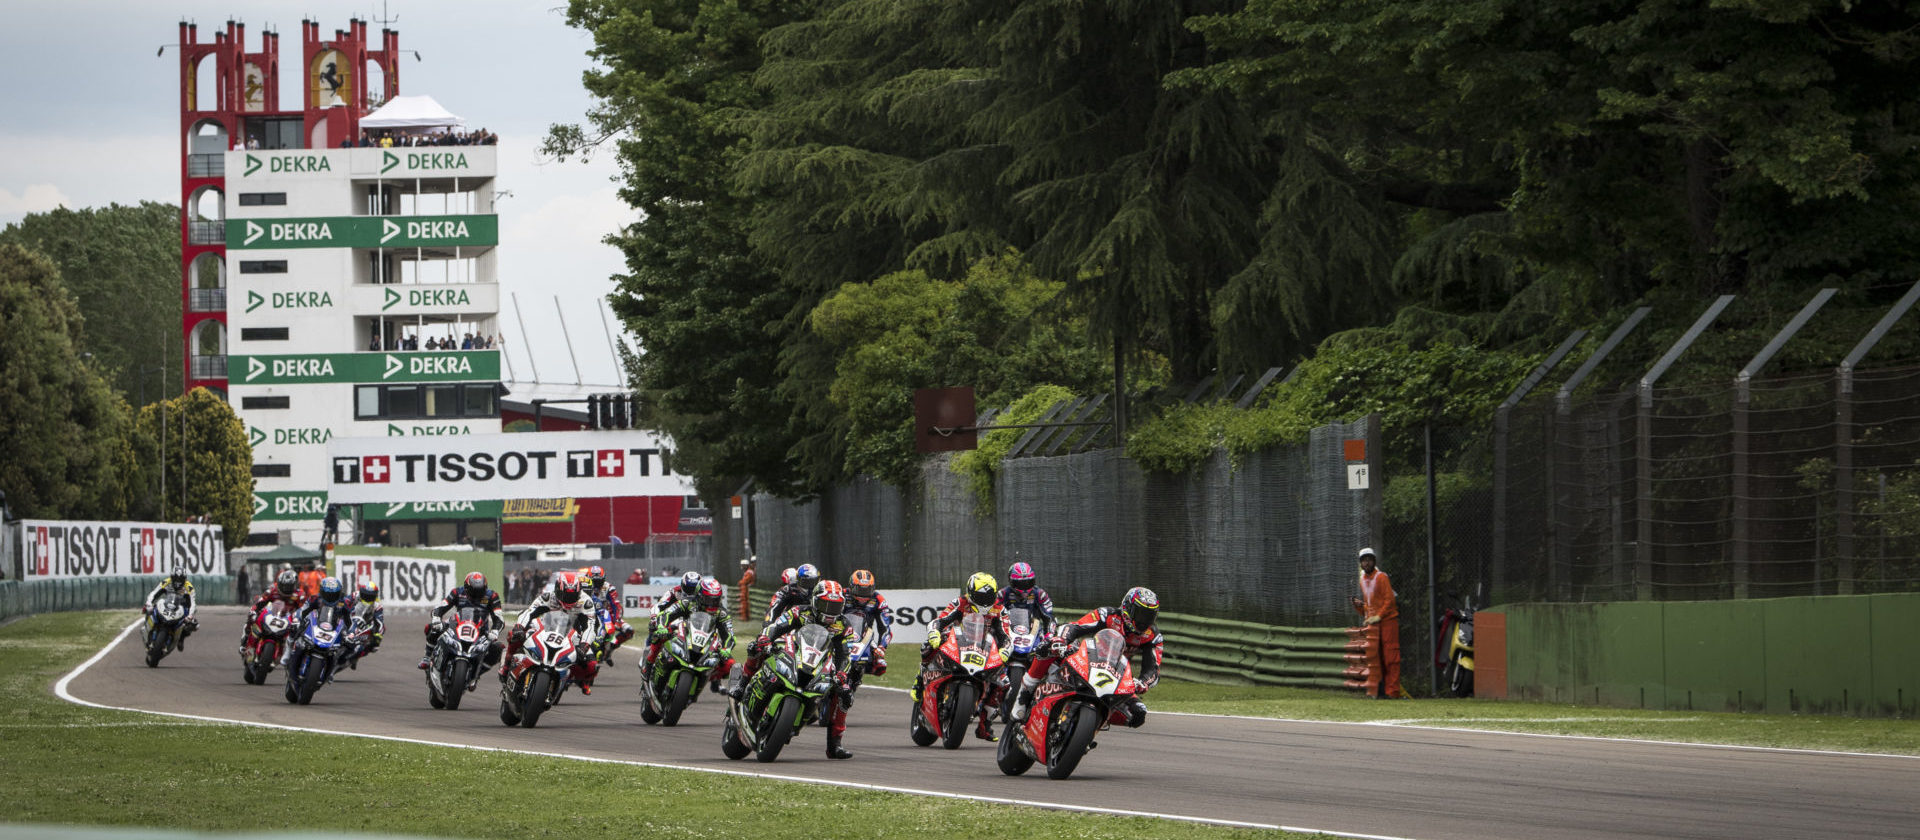 The start of a World Superbike race at Imola in 2019. Photo courtesy of Dorna WorldSBK Press Office.